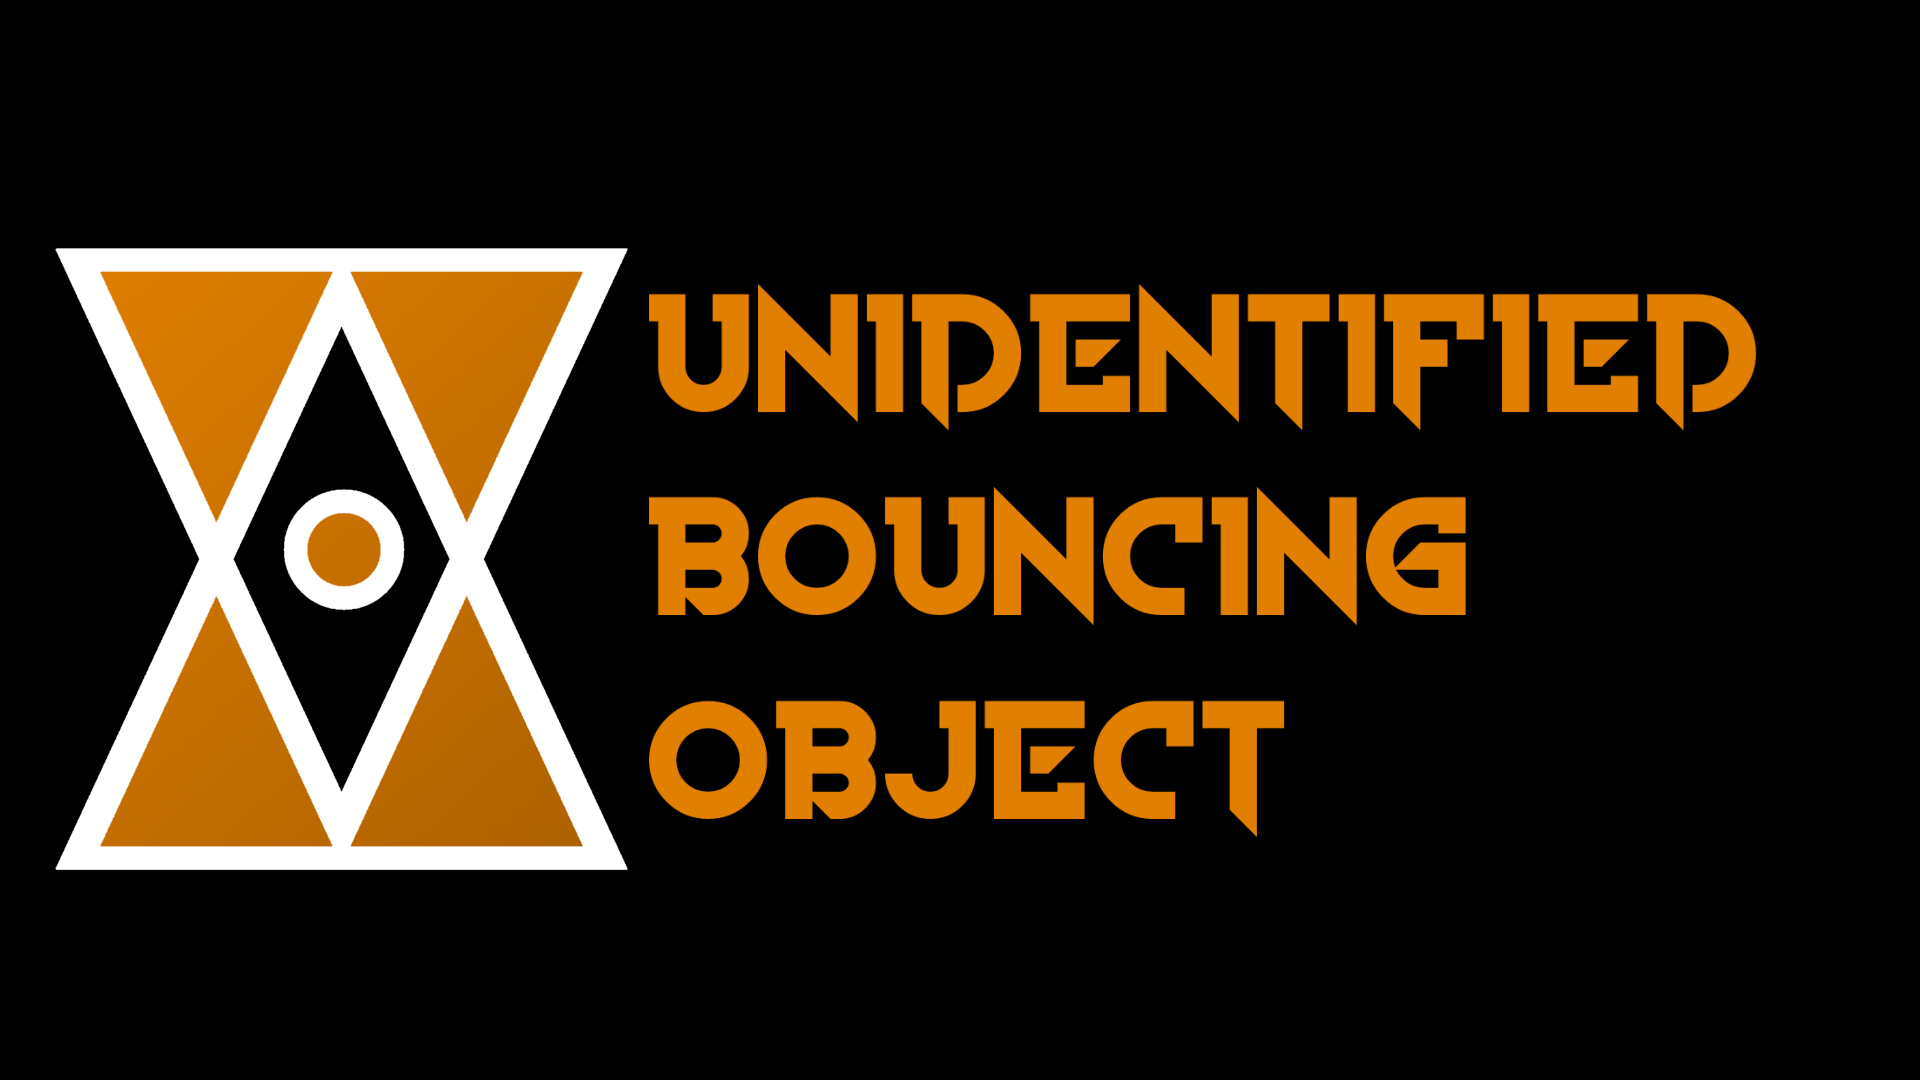 Unidentified Bouncing Object